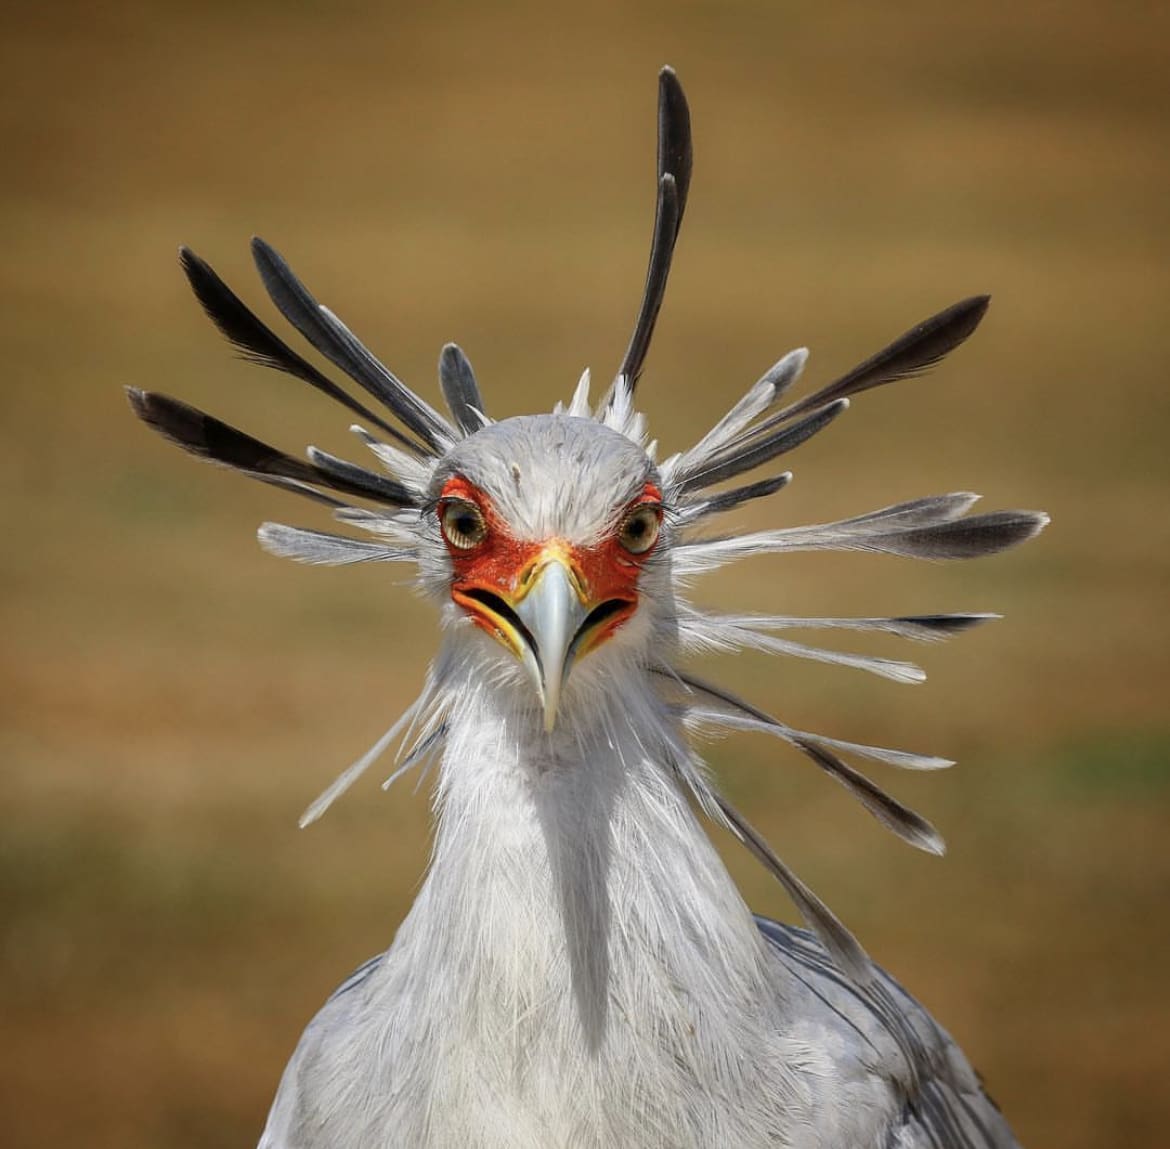 One of the most iconic birds in South Africa - A secretary bird head shot